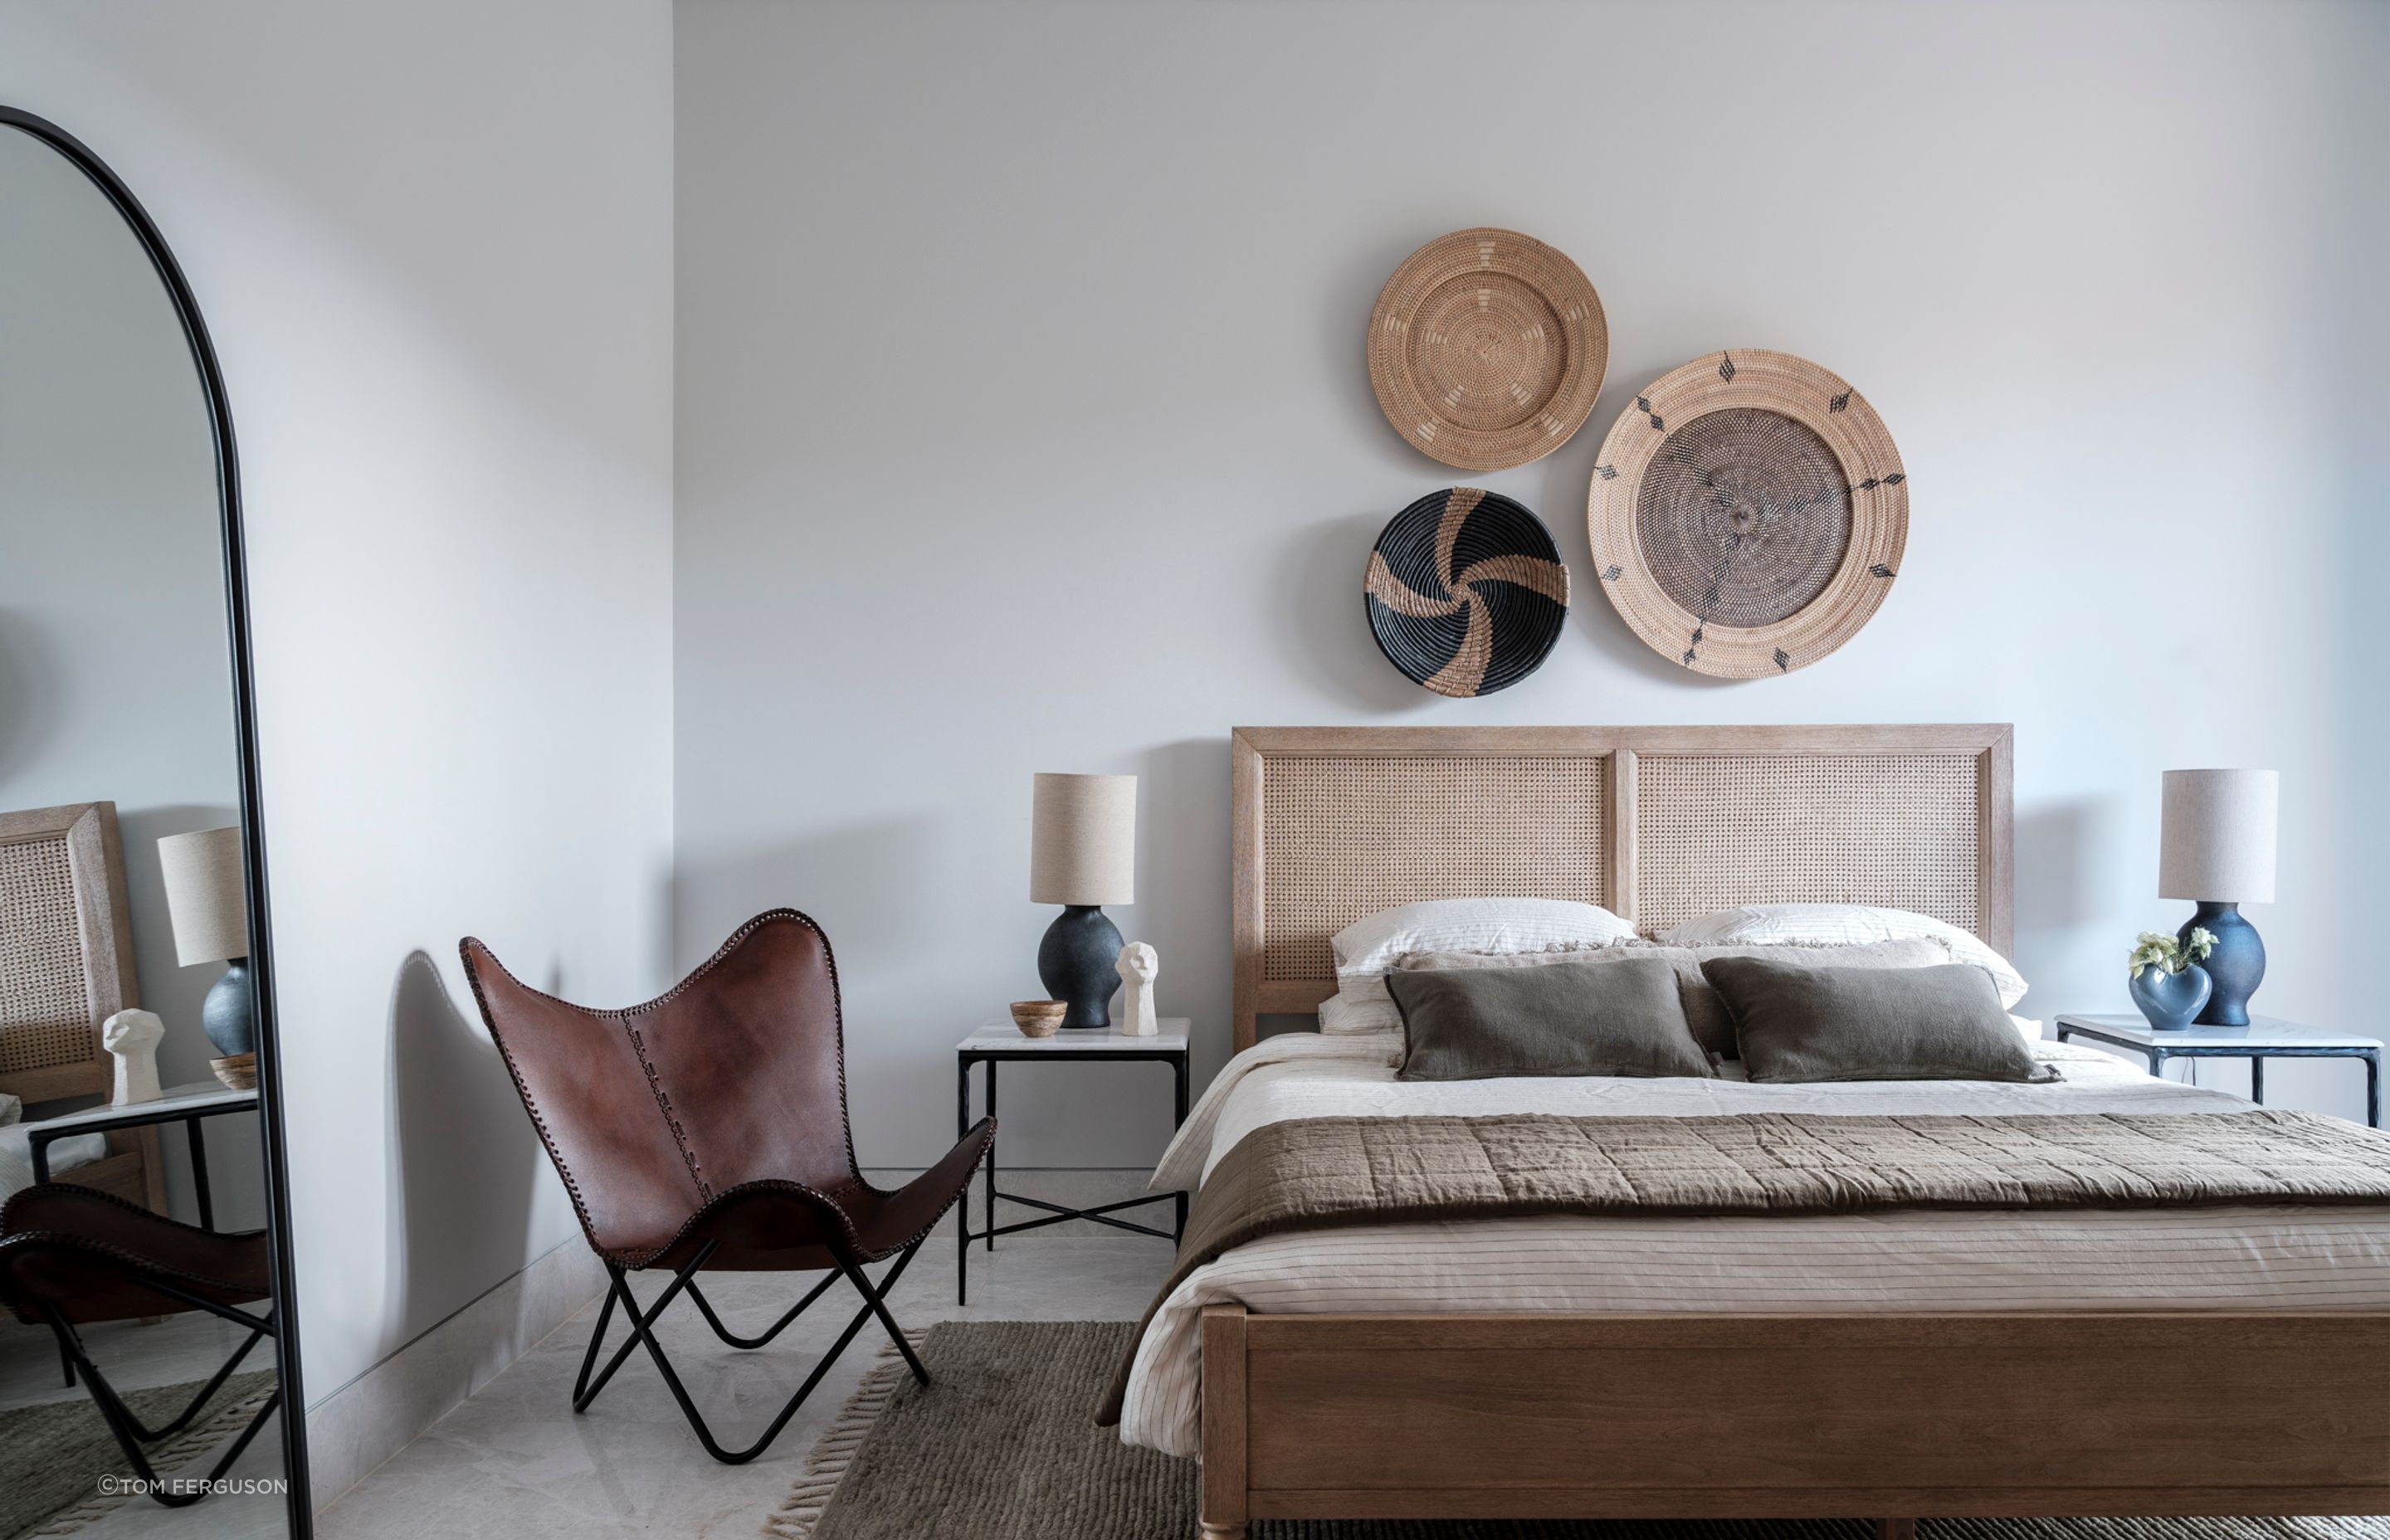 Studio LHD engaged the craftsmanship of talented artisans and local suppliers for this project. In this bedroom, the wall-mounted baskets from a store in Gerringong are textural and fit perfectly with the materiality of the space.